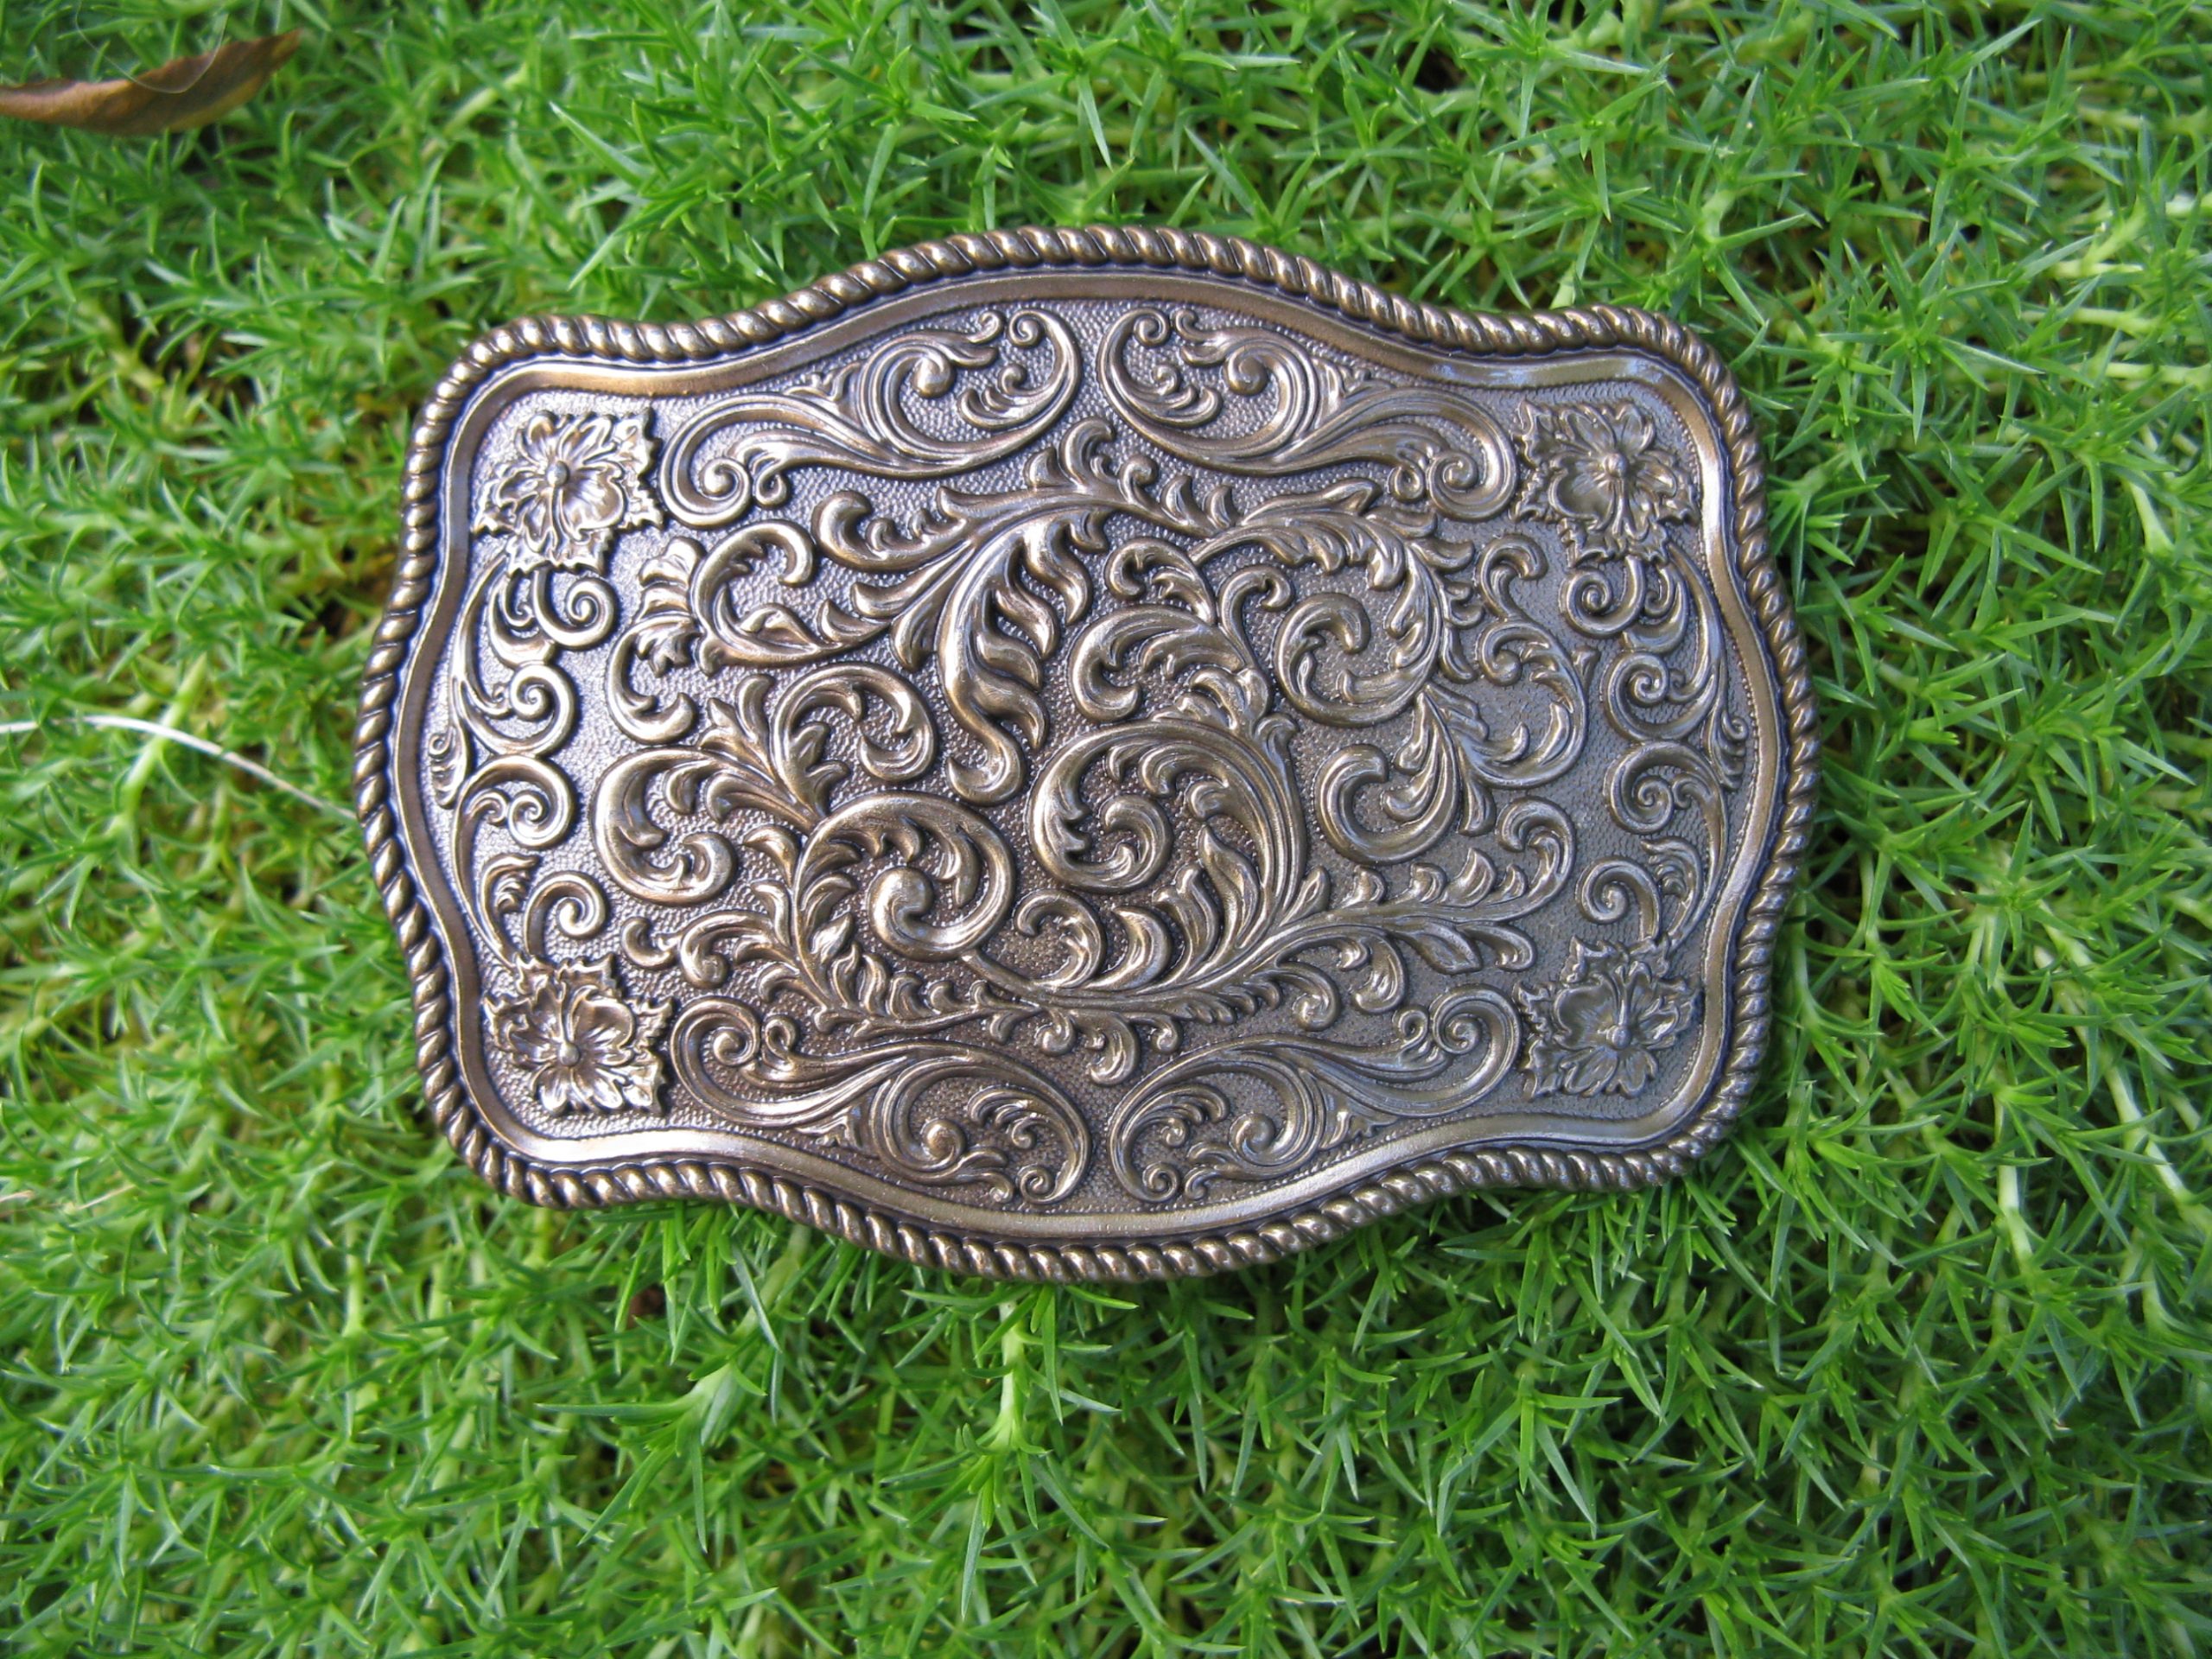 WESTERN FLORAL ROPE EDGE ANTIQUE GOLD PLATED  BELT BUCKLE